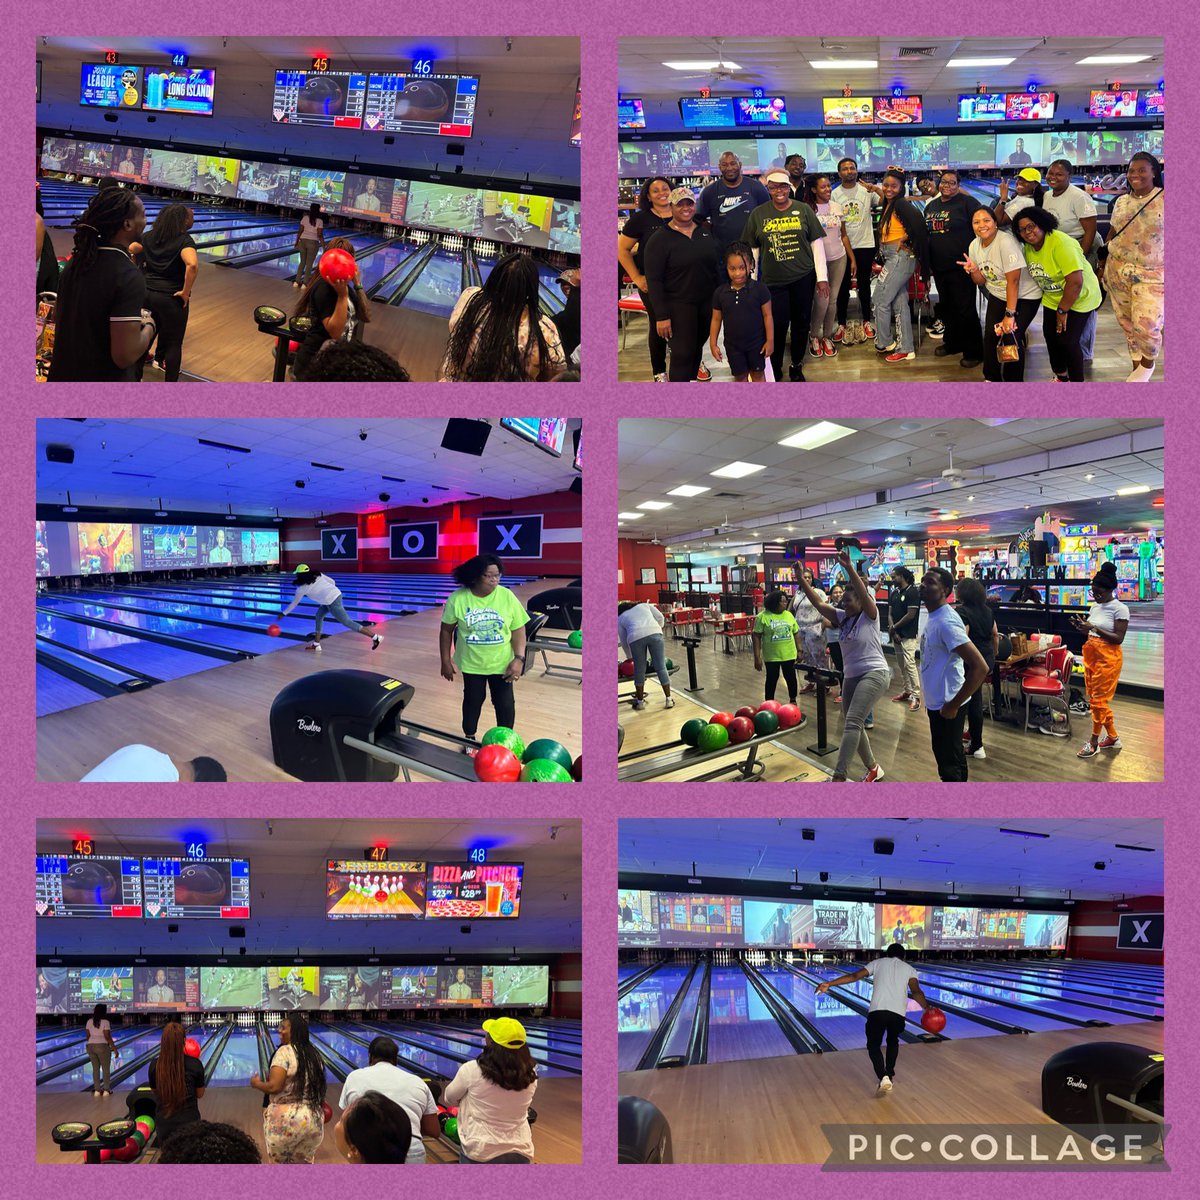 Boy, we had a time last night! Our @RPEMuseummagnet staff brought out their competitive side. We laughed, bowled, and laughed some more. The laughter was good for our souls. Great way to end the week. @RPE_AP @DrDAugustin @BcpsCentral_ #OneTeamOneDream #MyRPE